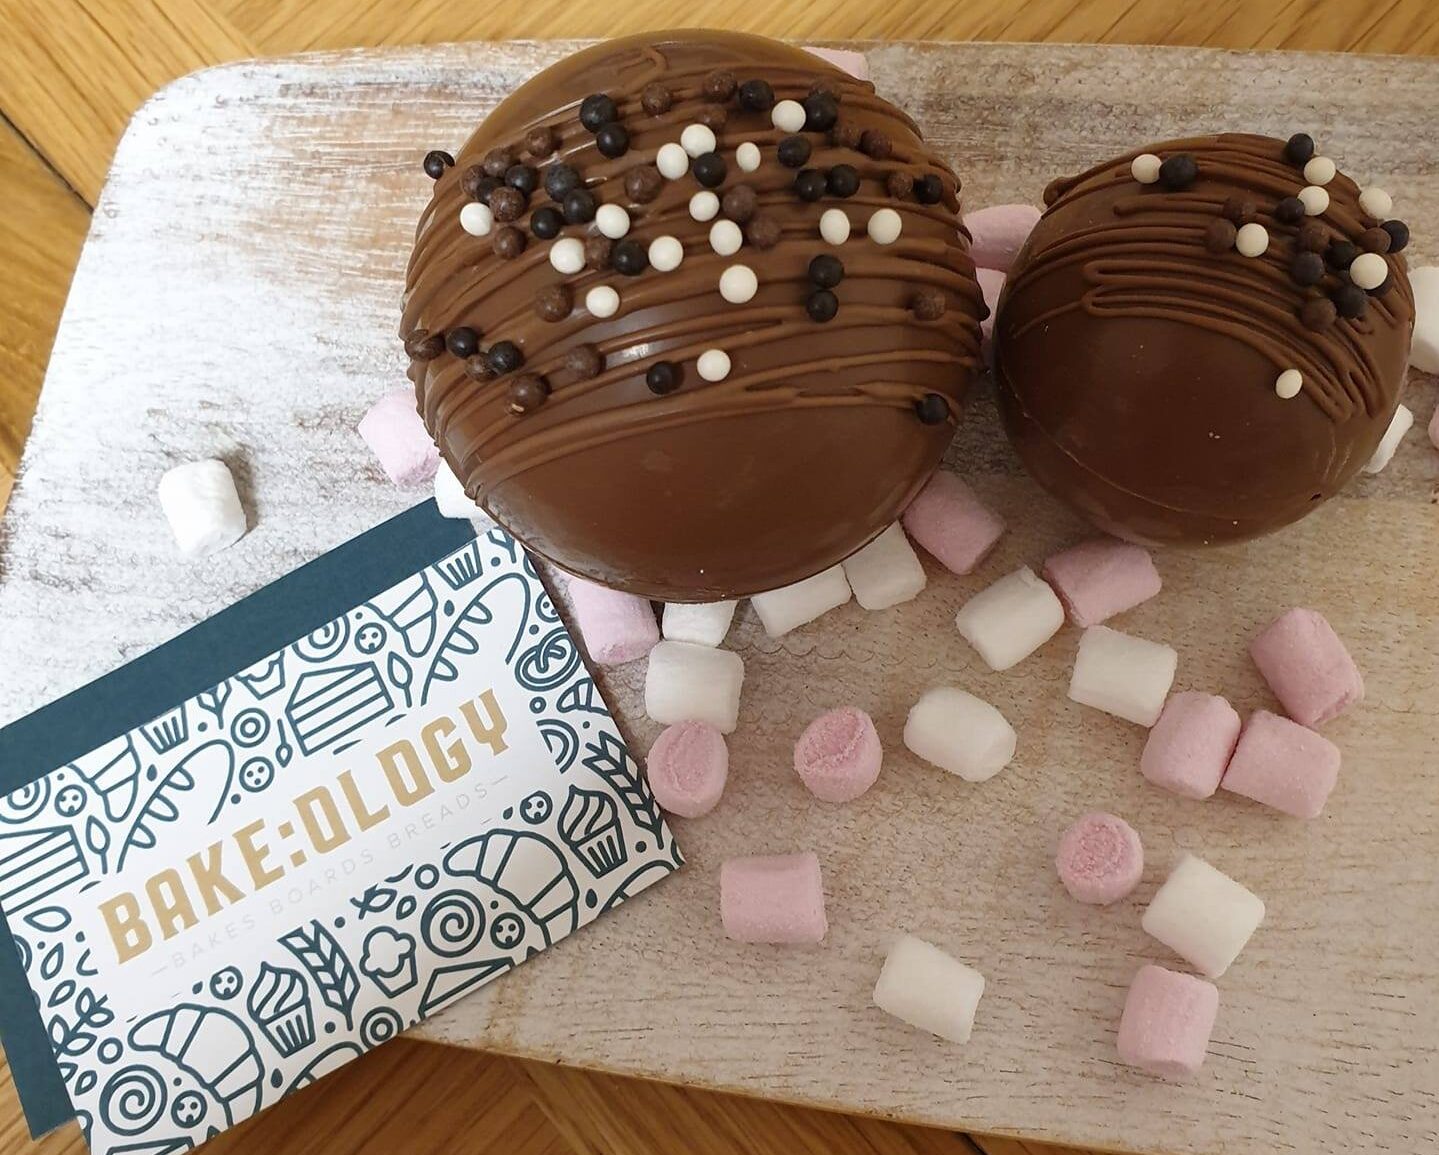 Baking company sends hilarious warning after woman mistakes hot &#8216;chocolate bomb&#8217; for bath bomb, The Manc